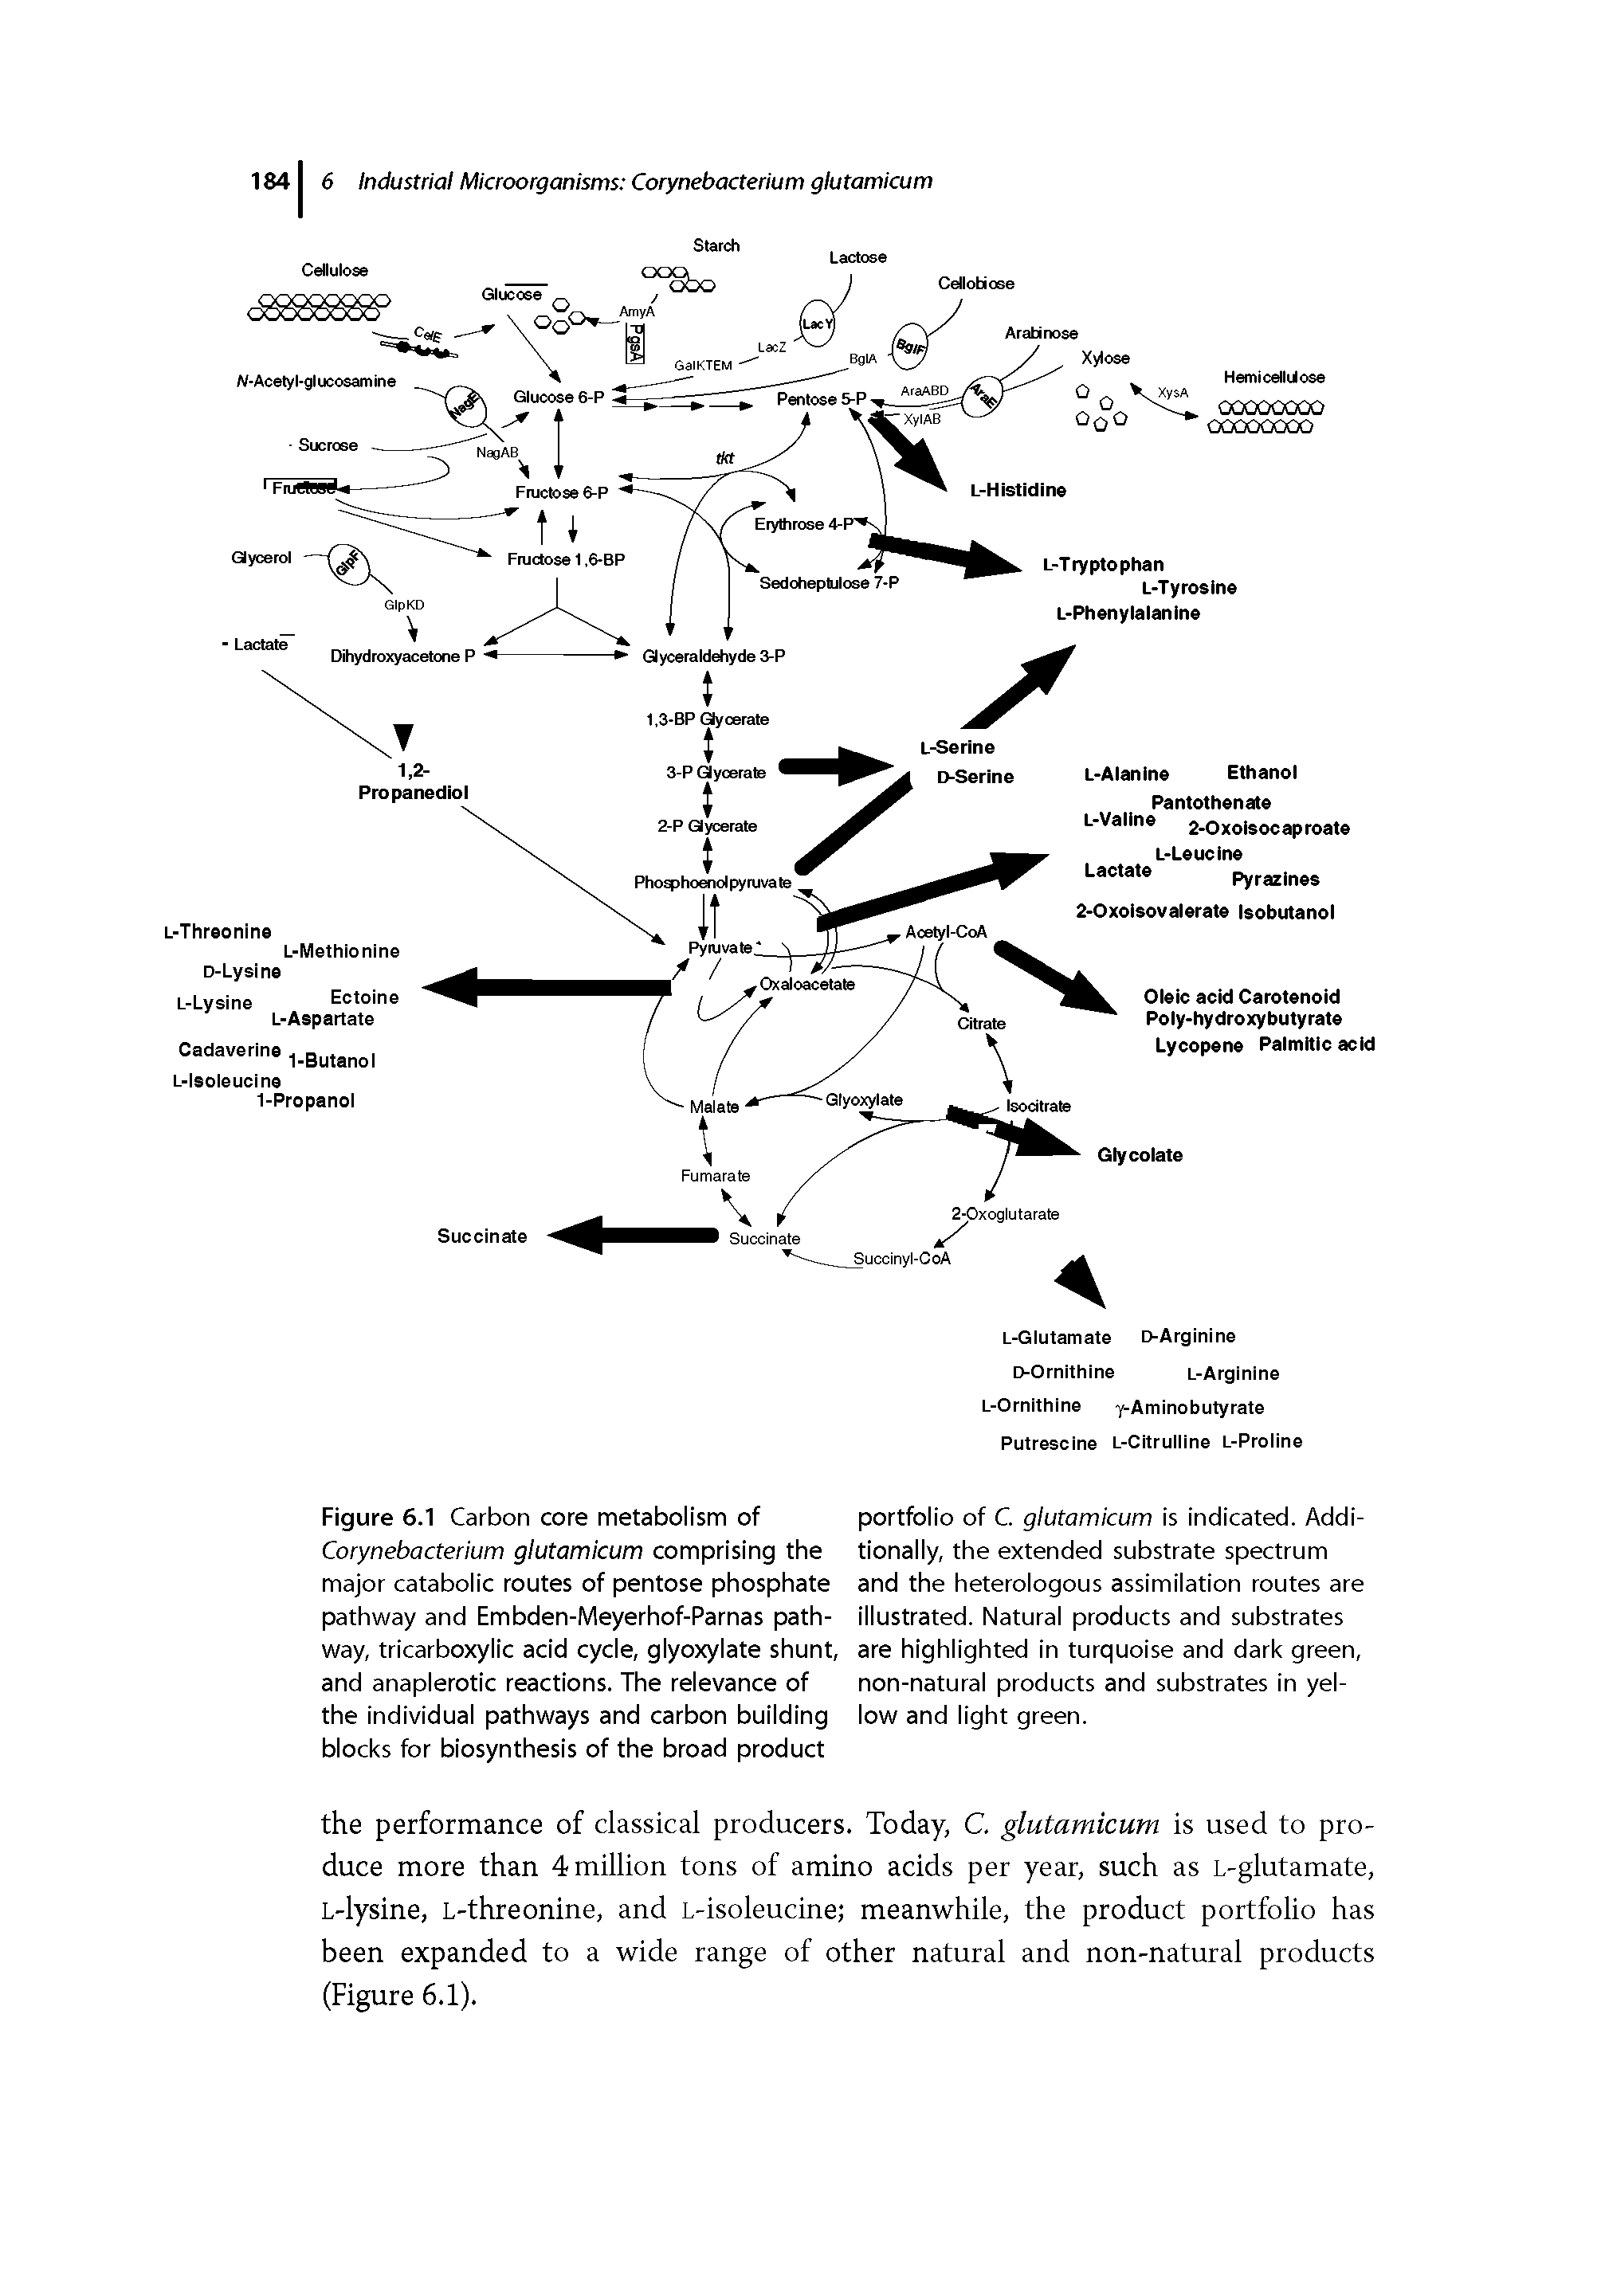 Figure 6.1 Carbon core metabolism of Corynebacterium glutamicum comprising the major catabolic routes of pentose phosphate pathway and Embden-Meyerhof-Parnas pathway, tricarboxylic acid cycle, glyoxylate shunt, and anaplerotic reactions. The relevance of the individual pathways and carbon building blocks for biosynthesis of the broad product...